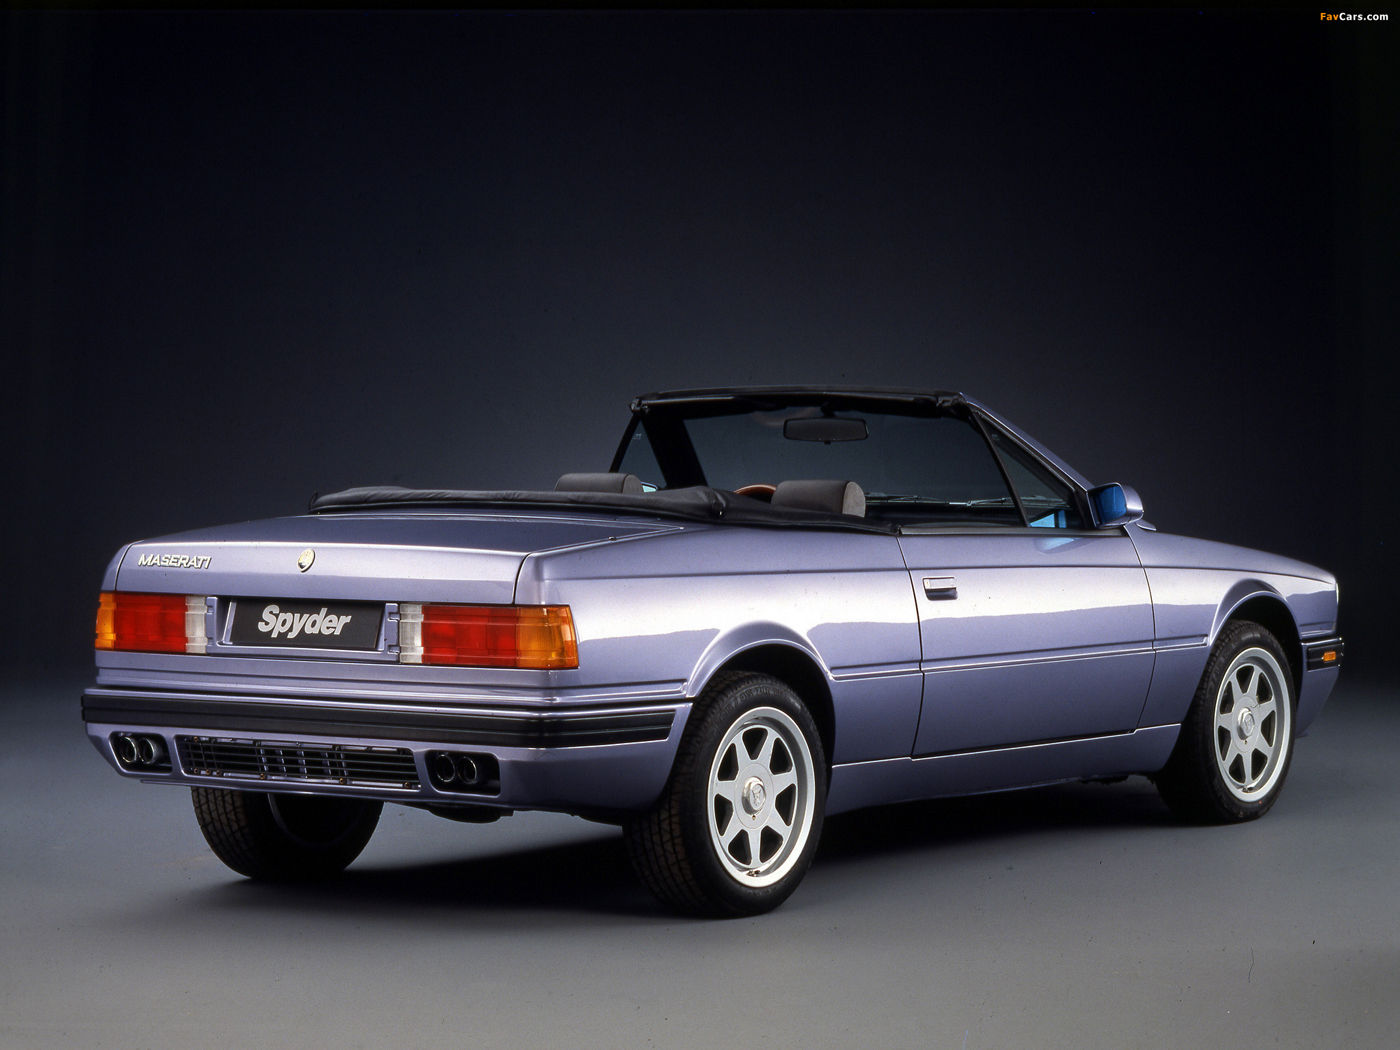 1991 Maserati Spyder III - rear view of the classic convertible